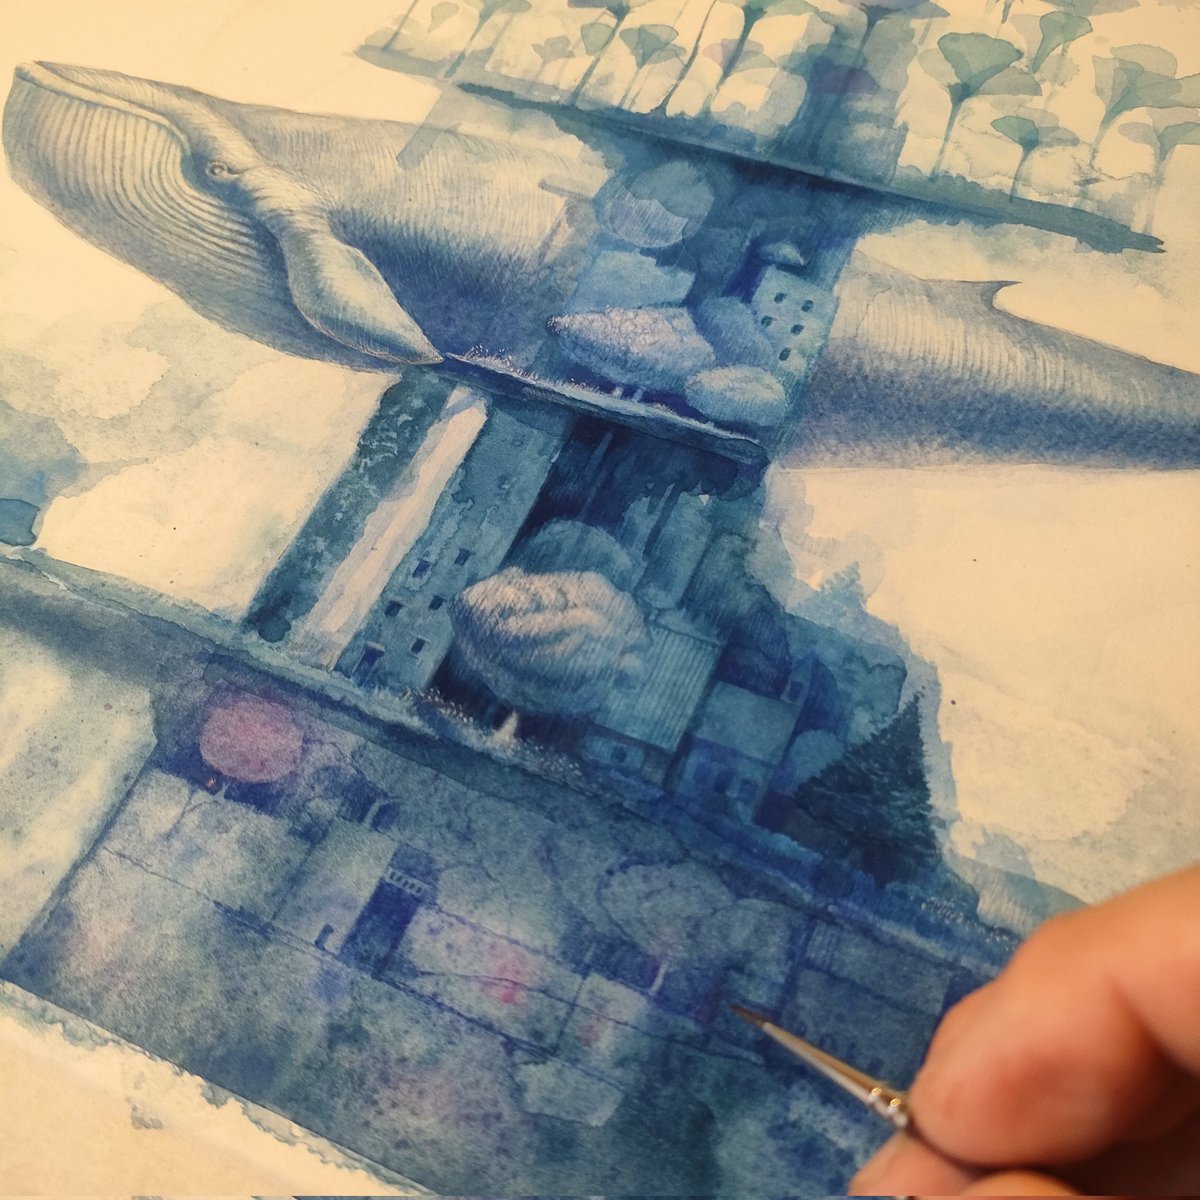 f6サイズ。クジラと花と何に使われたかわからない建物。
f6 size.  A whale, a flower, and a building I don't know what it was used for.

#watercoloerpainting #watercoloerartist #watercoloerillustration #art #watercolor  #青 #透明水彩 #drawing #blue #art #illustration  #イラスト